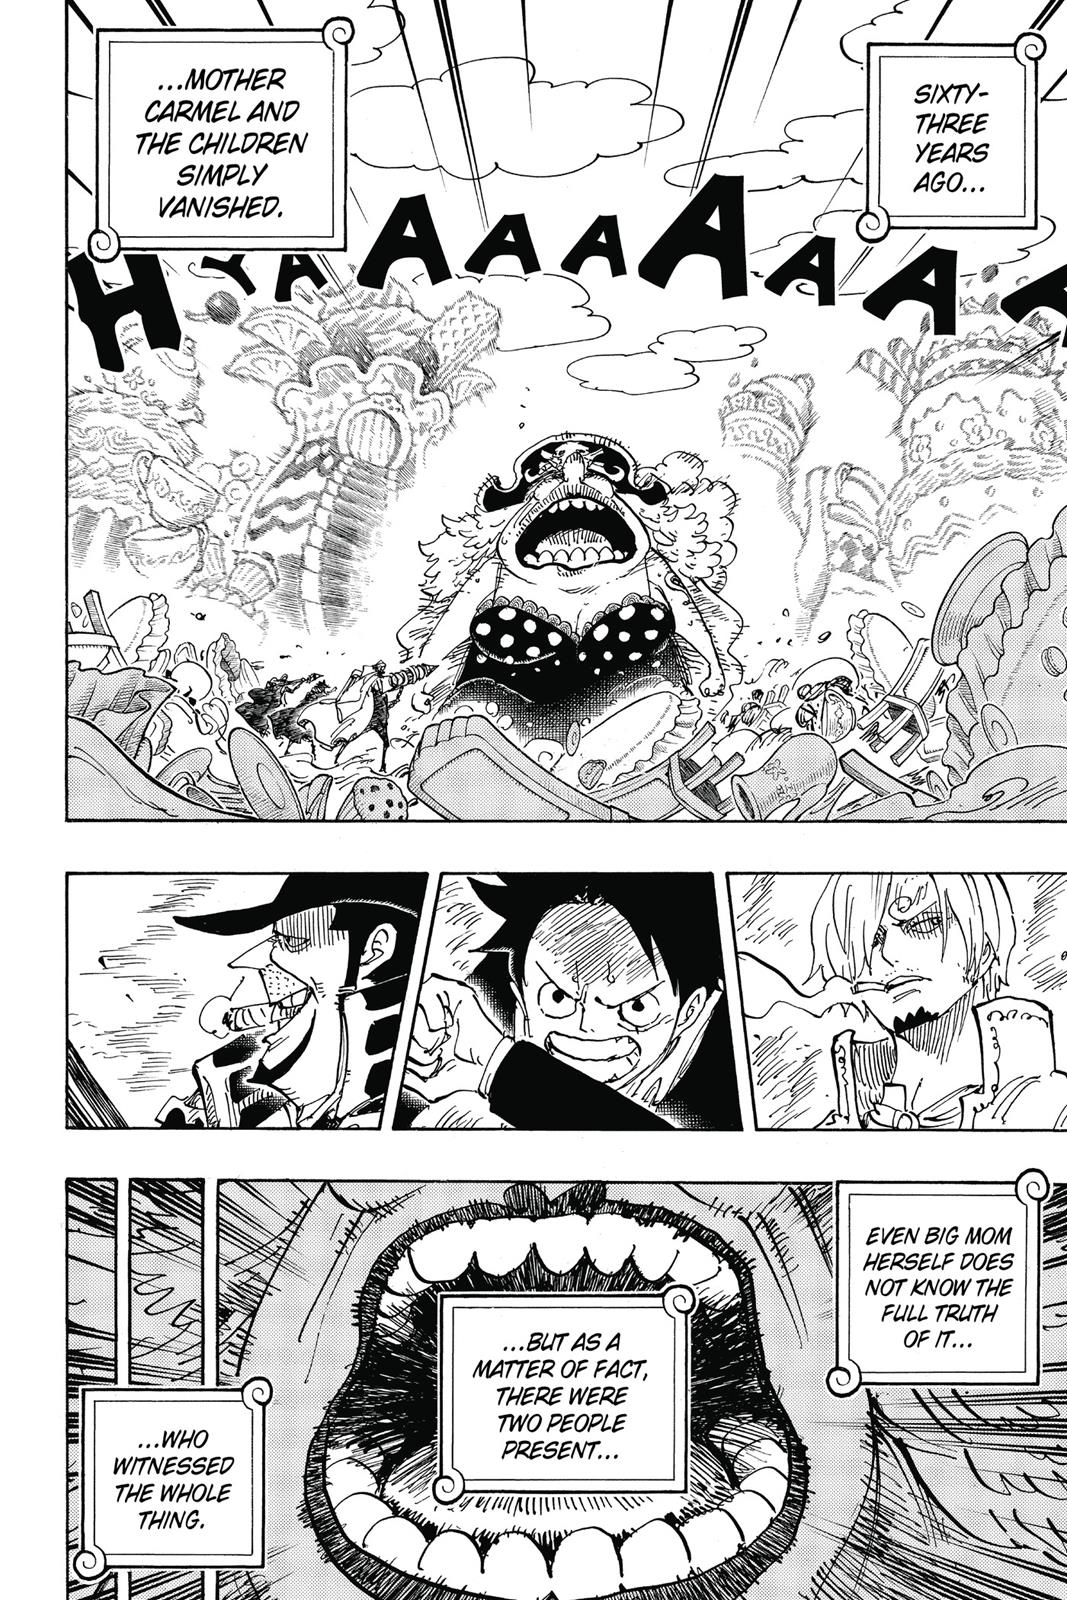 One Piece Chapter 868 One Piece Manga Online